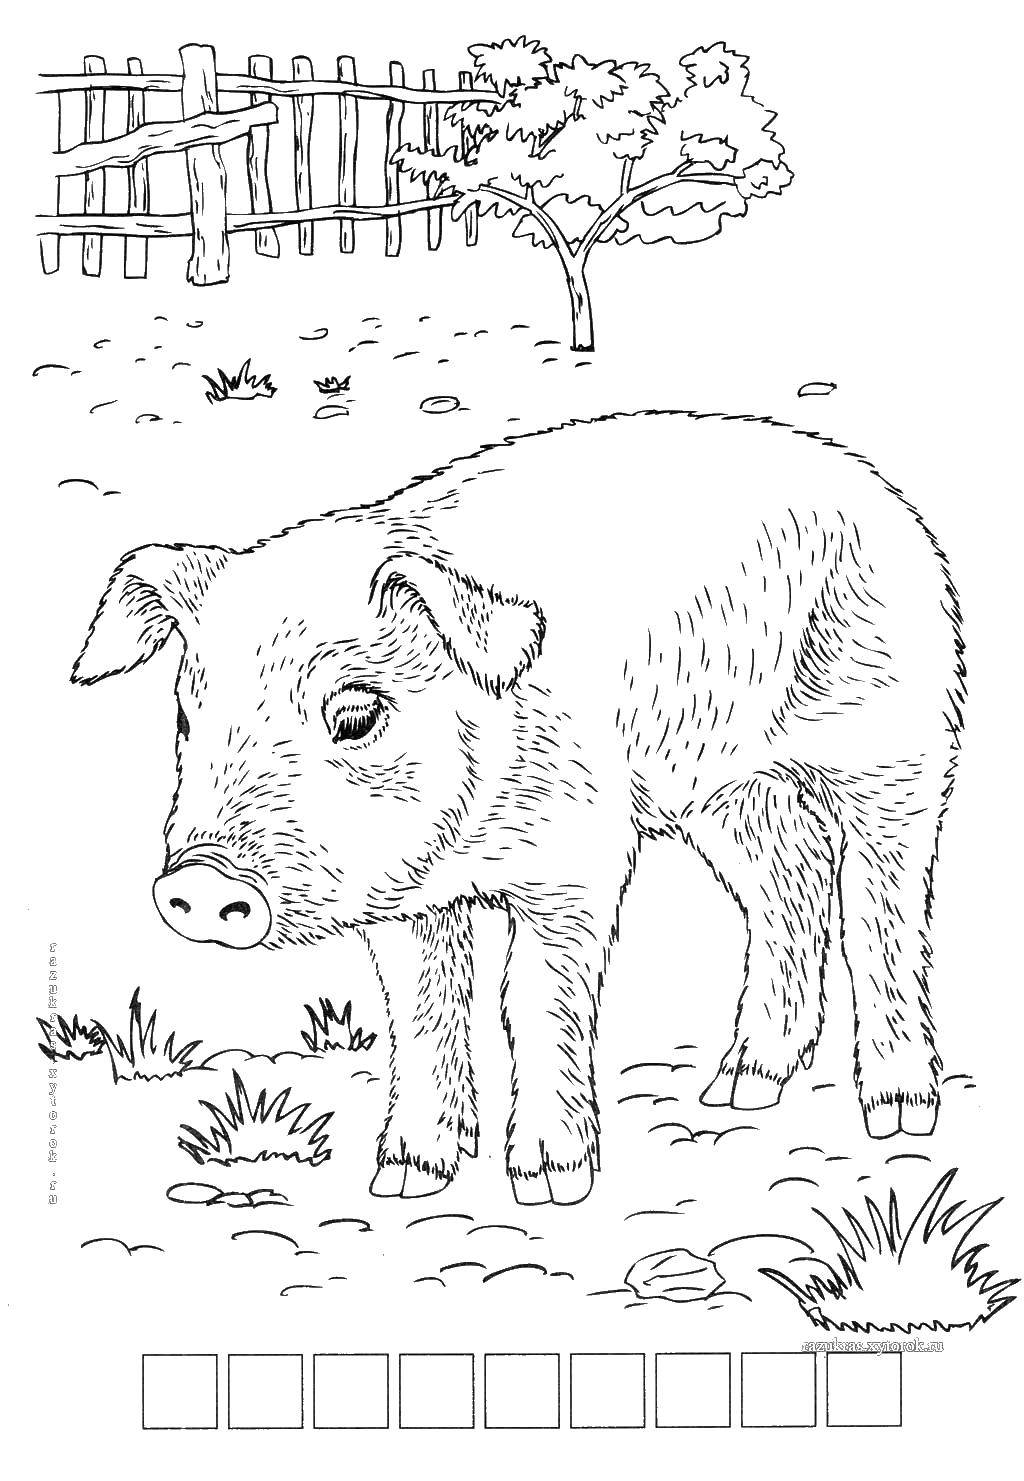 Coloring Sad pig. Category Pets allowed. Tags:  Animals, pig.